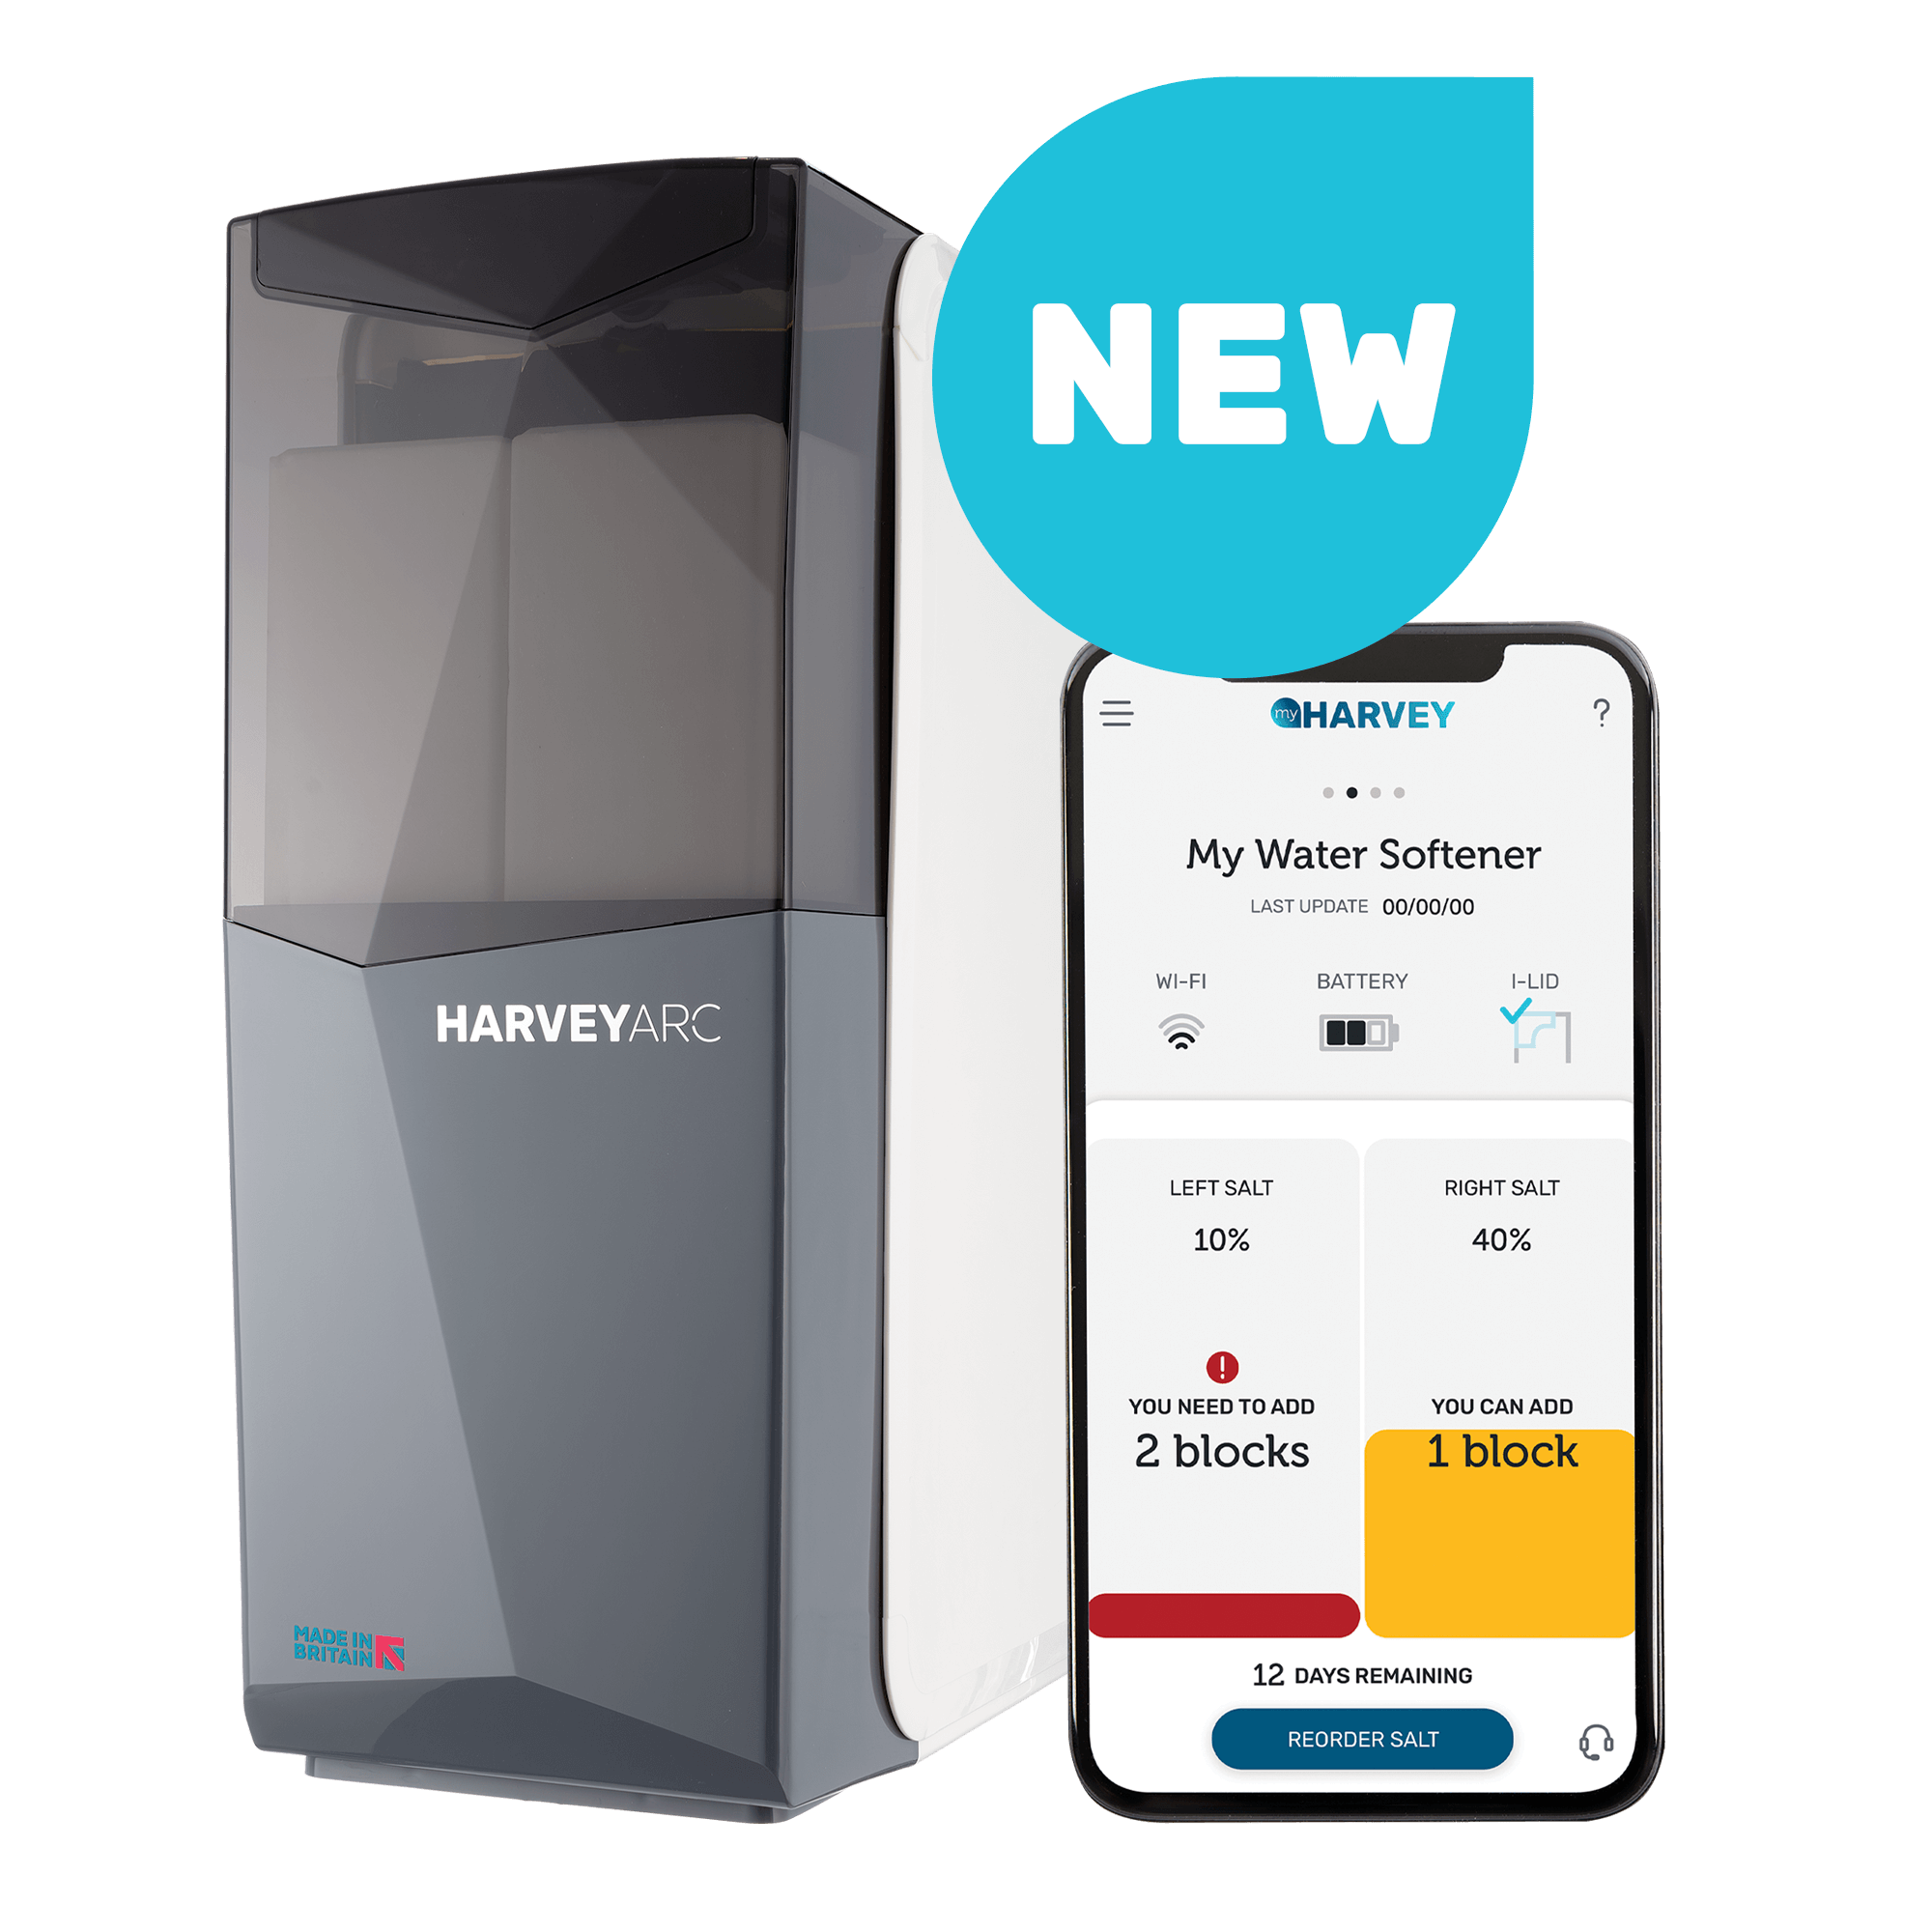 HarveyArc page - Phone and Softener - NEW Softener Droplet